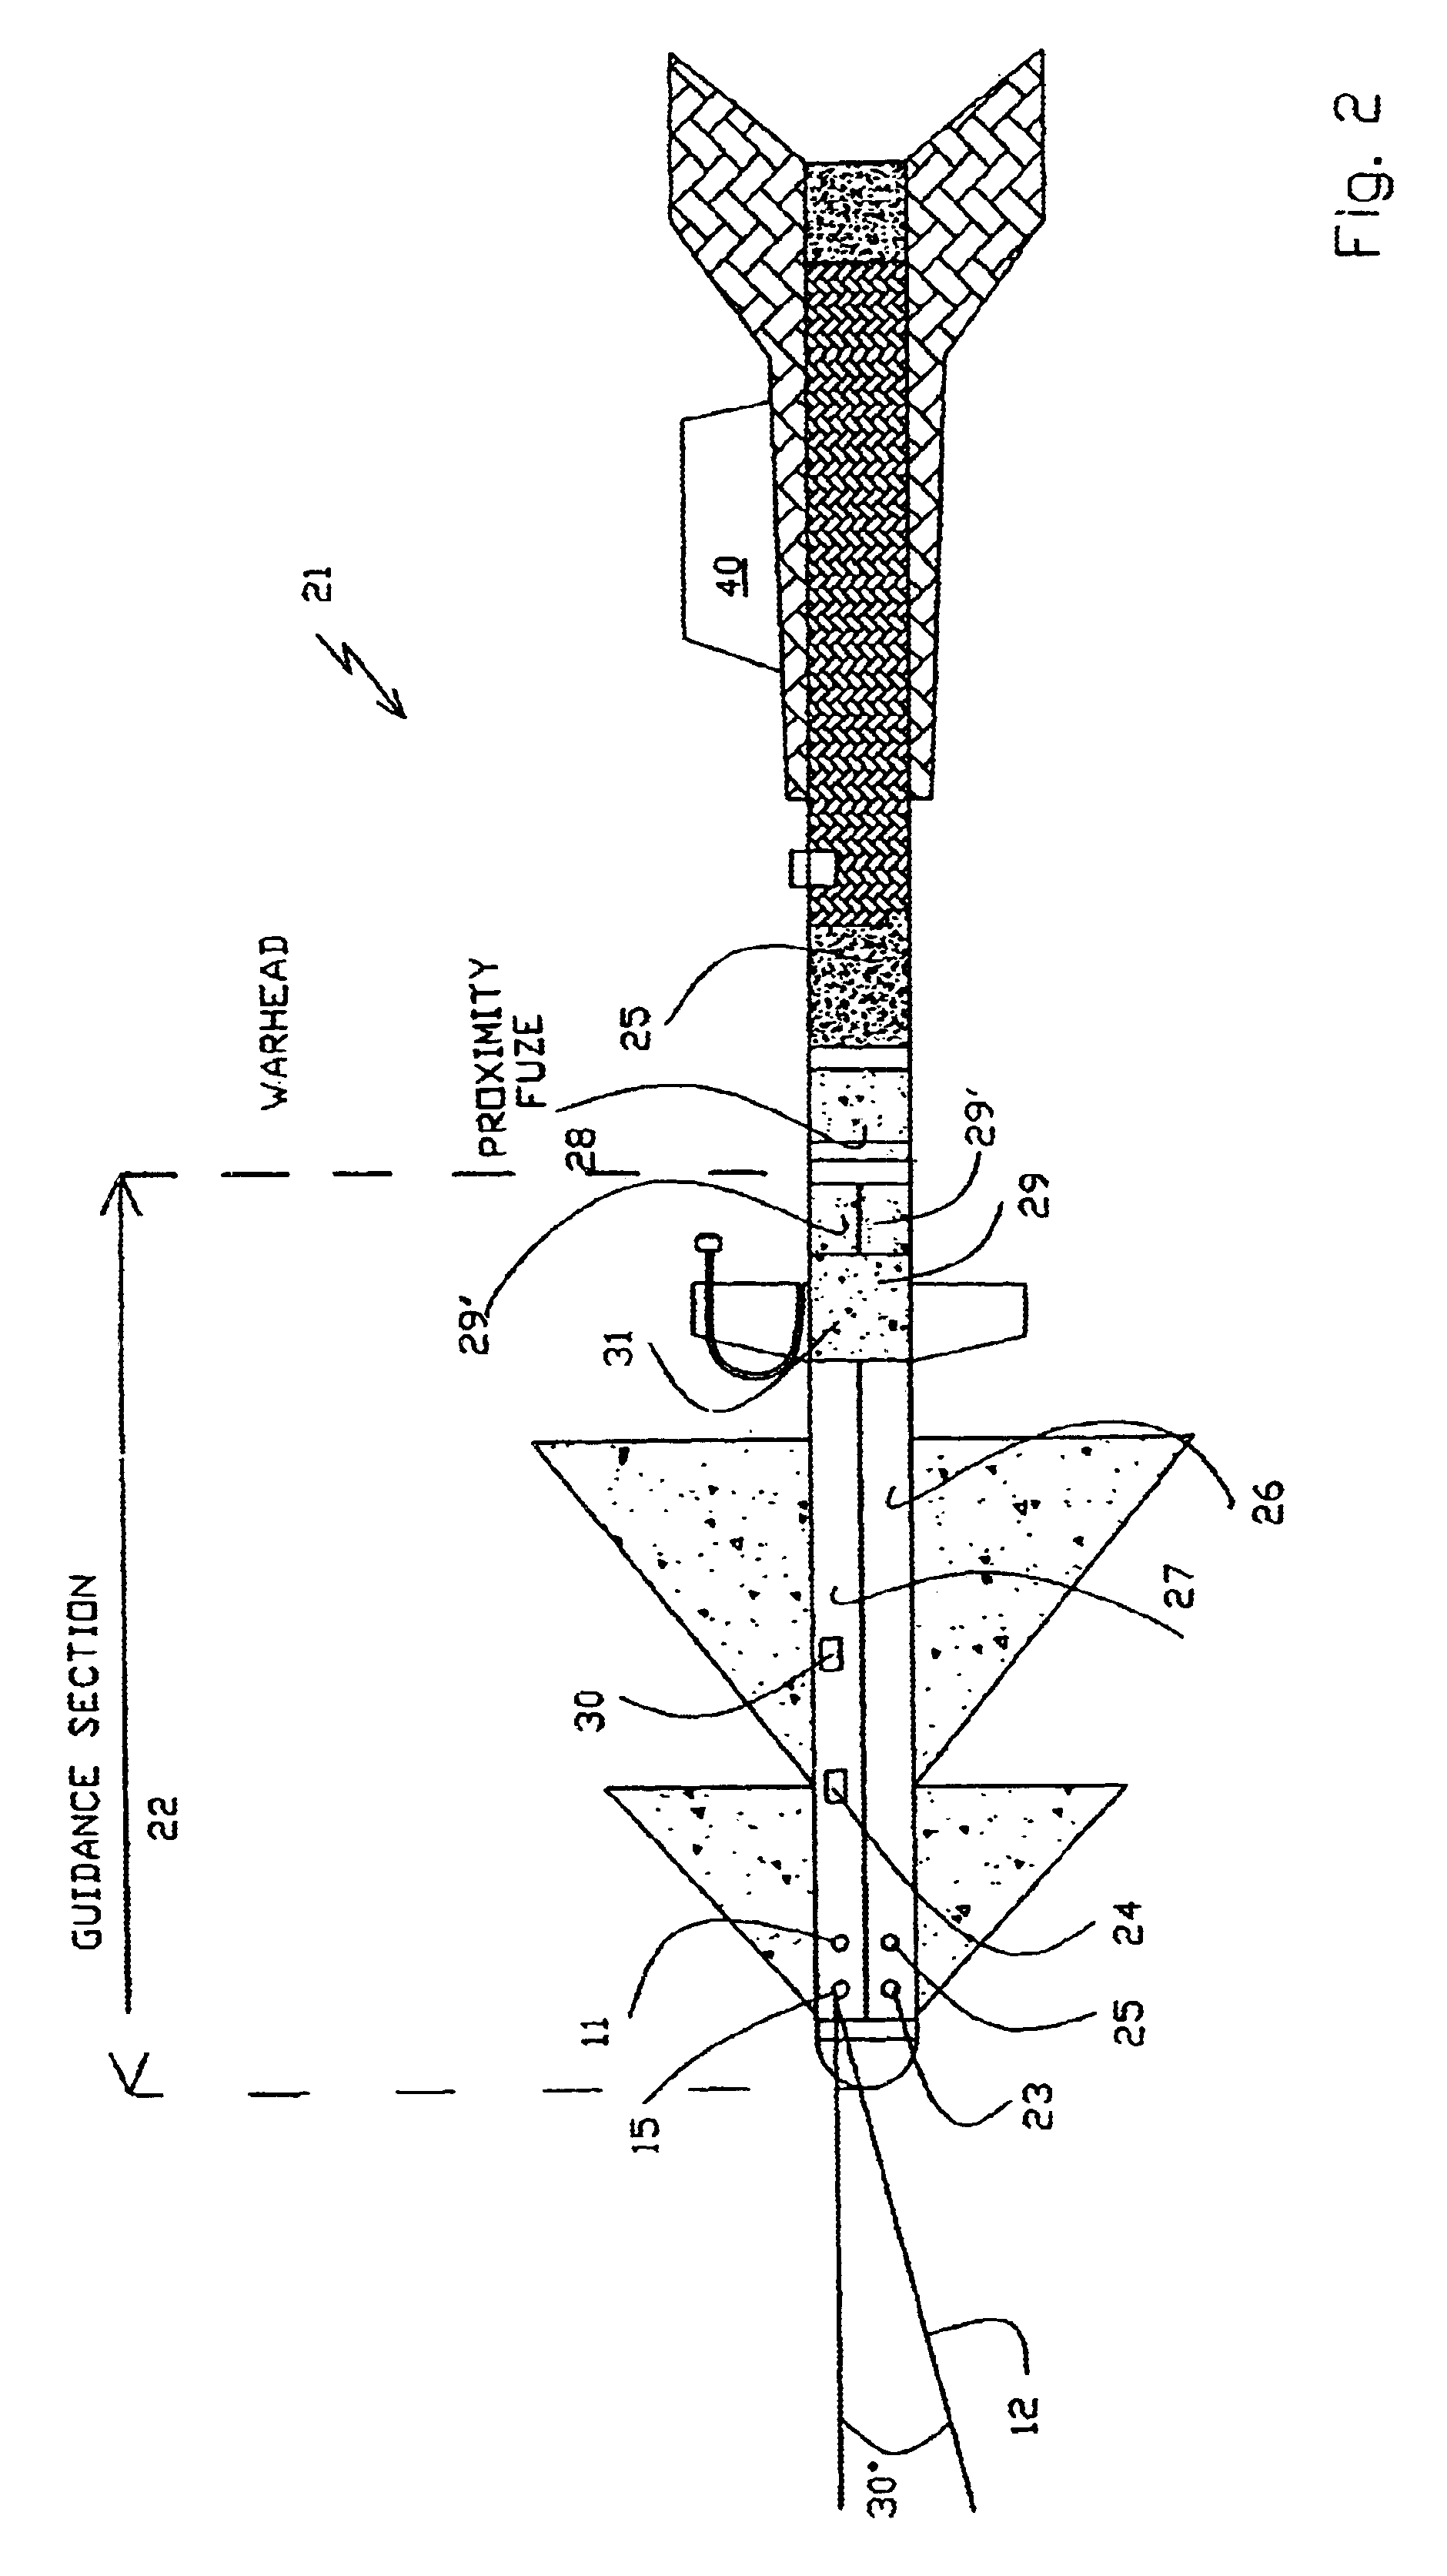 Method and system for active laser imagery guidance of intercepting missiles